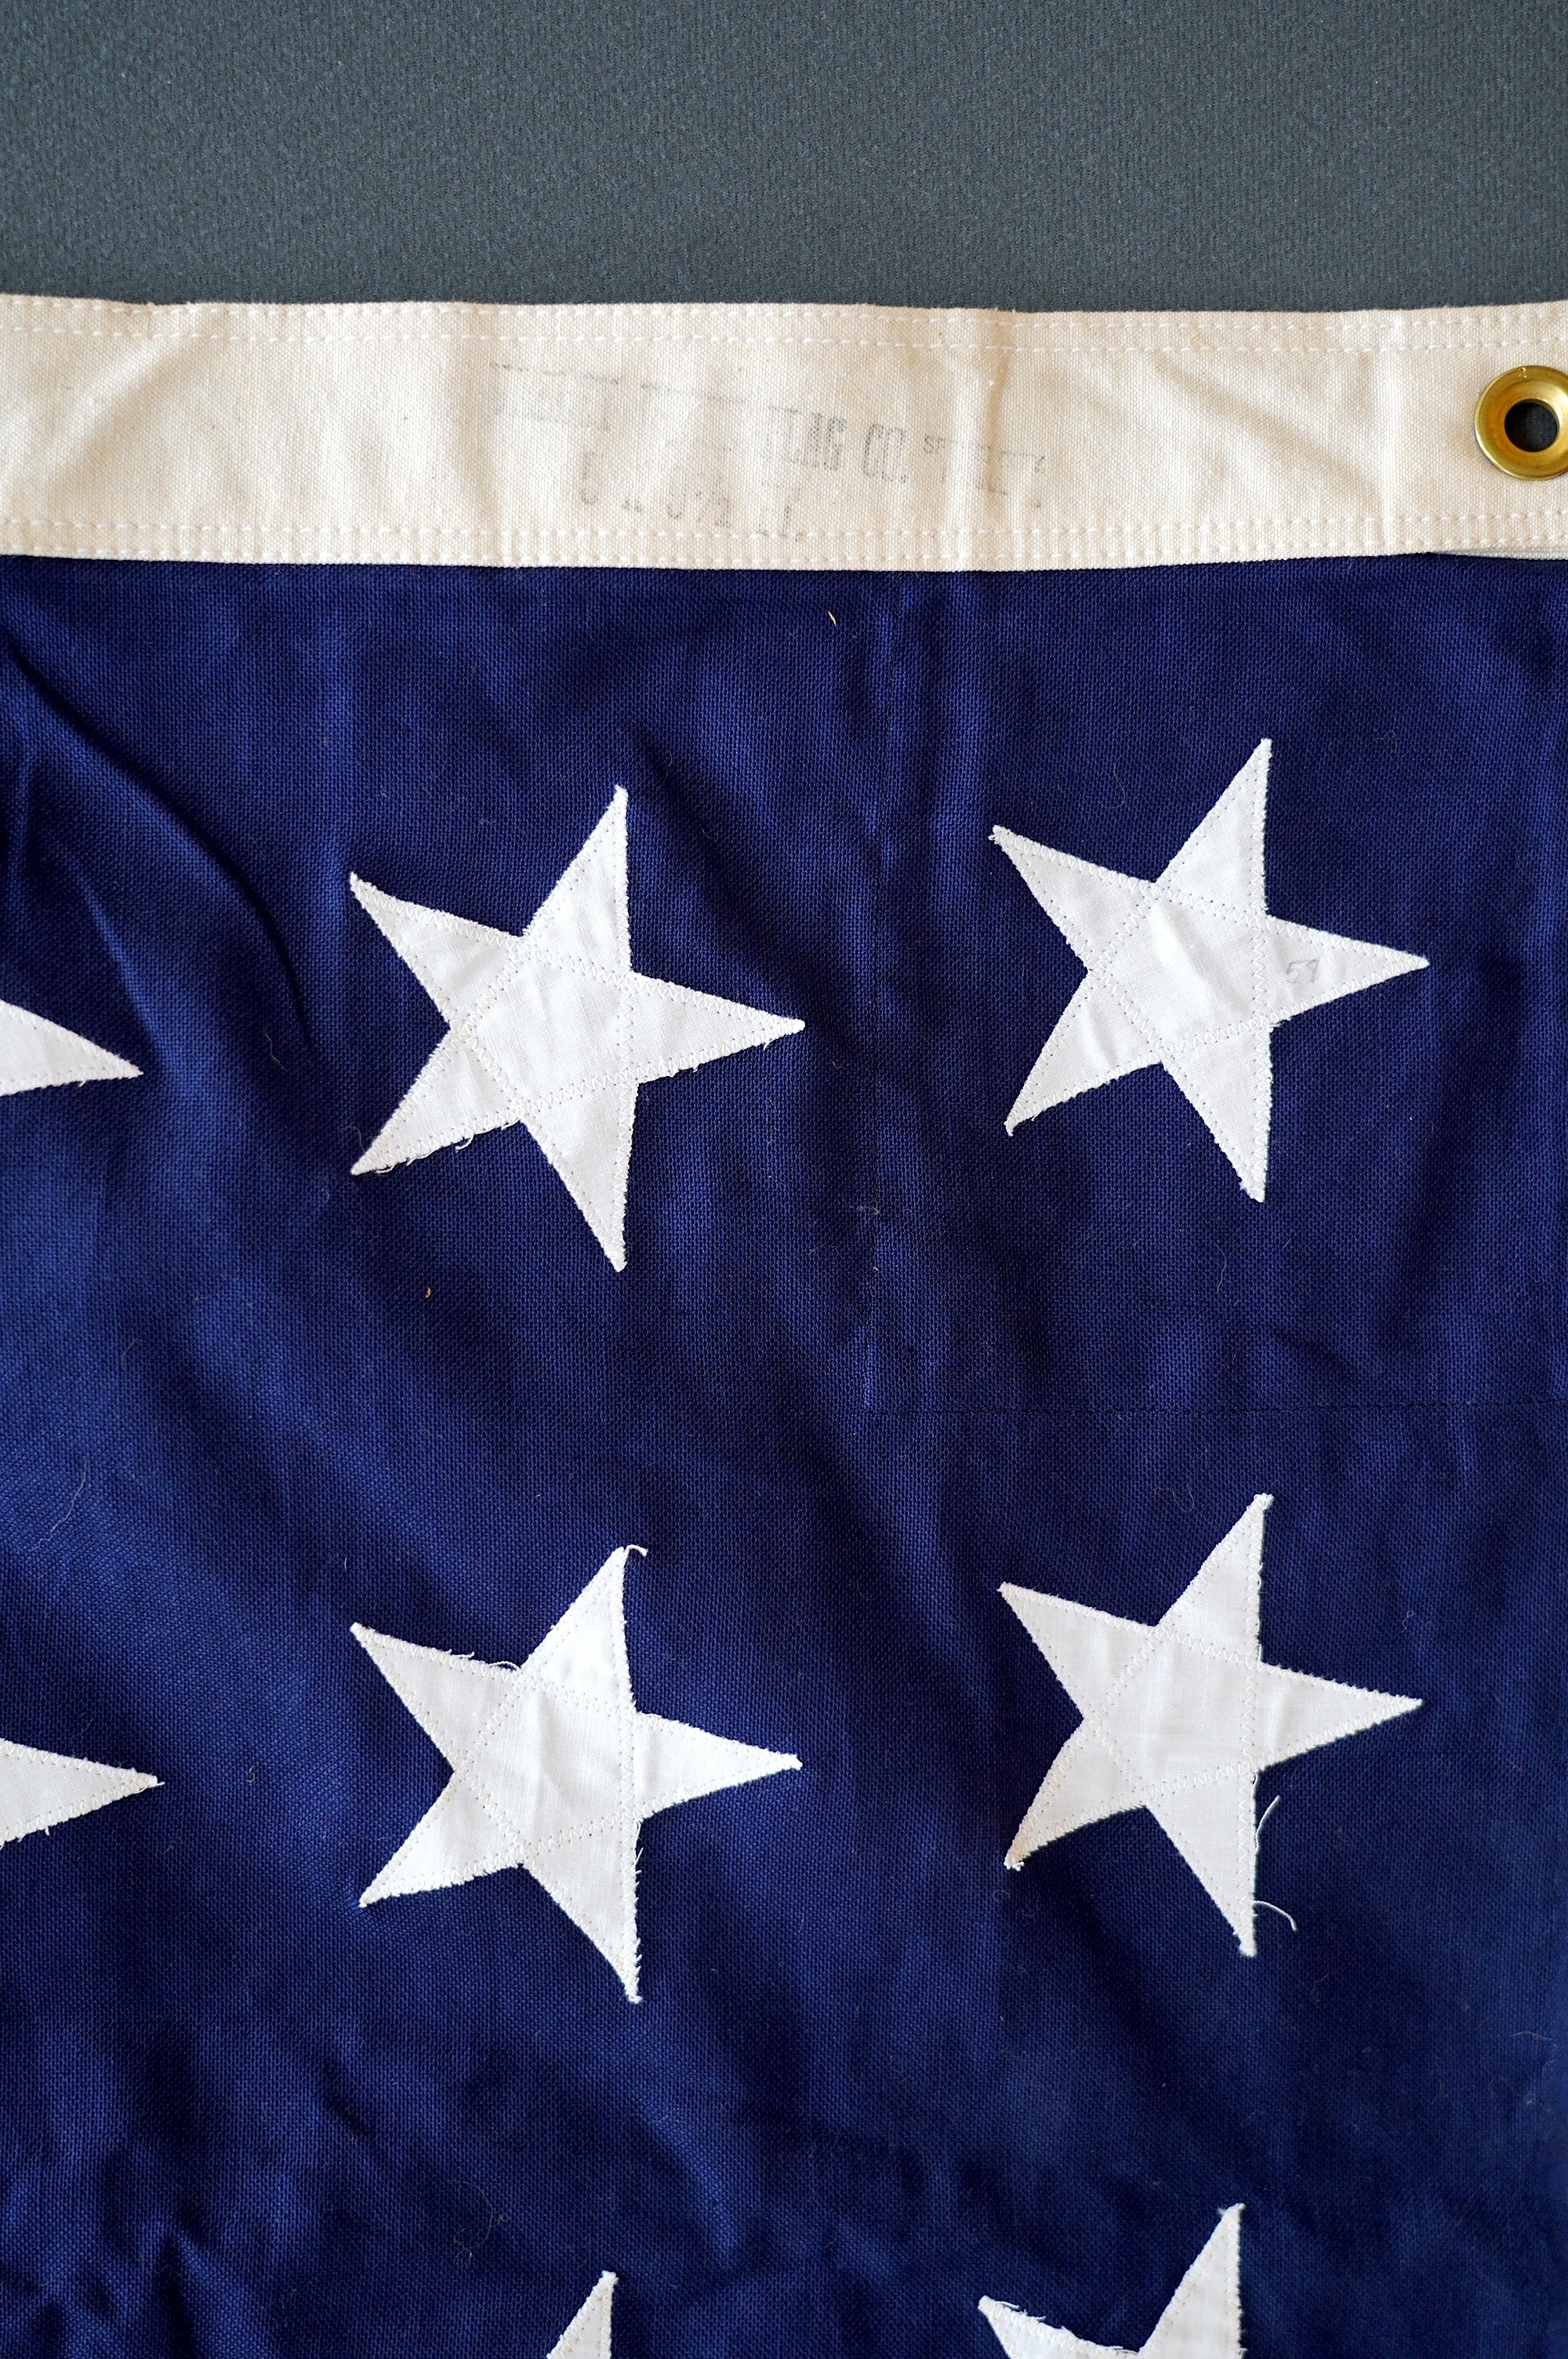 Four flags; two professionally made US Stars and Stripes, both on thick canvas with applied stars and joined stripes, one by the Valley Forge Flag Co., Pennsylvania, stamped “5 x 9.5 ft”, 146 x 288cm and 176 x 300cm, tog